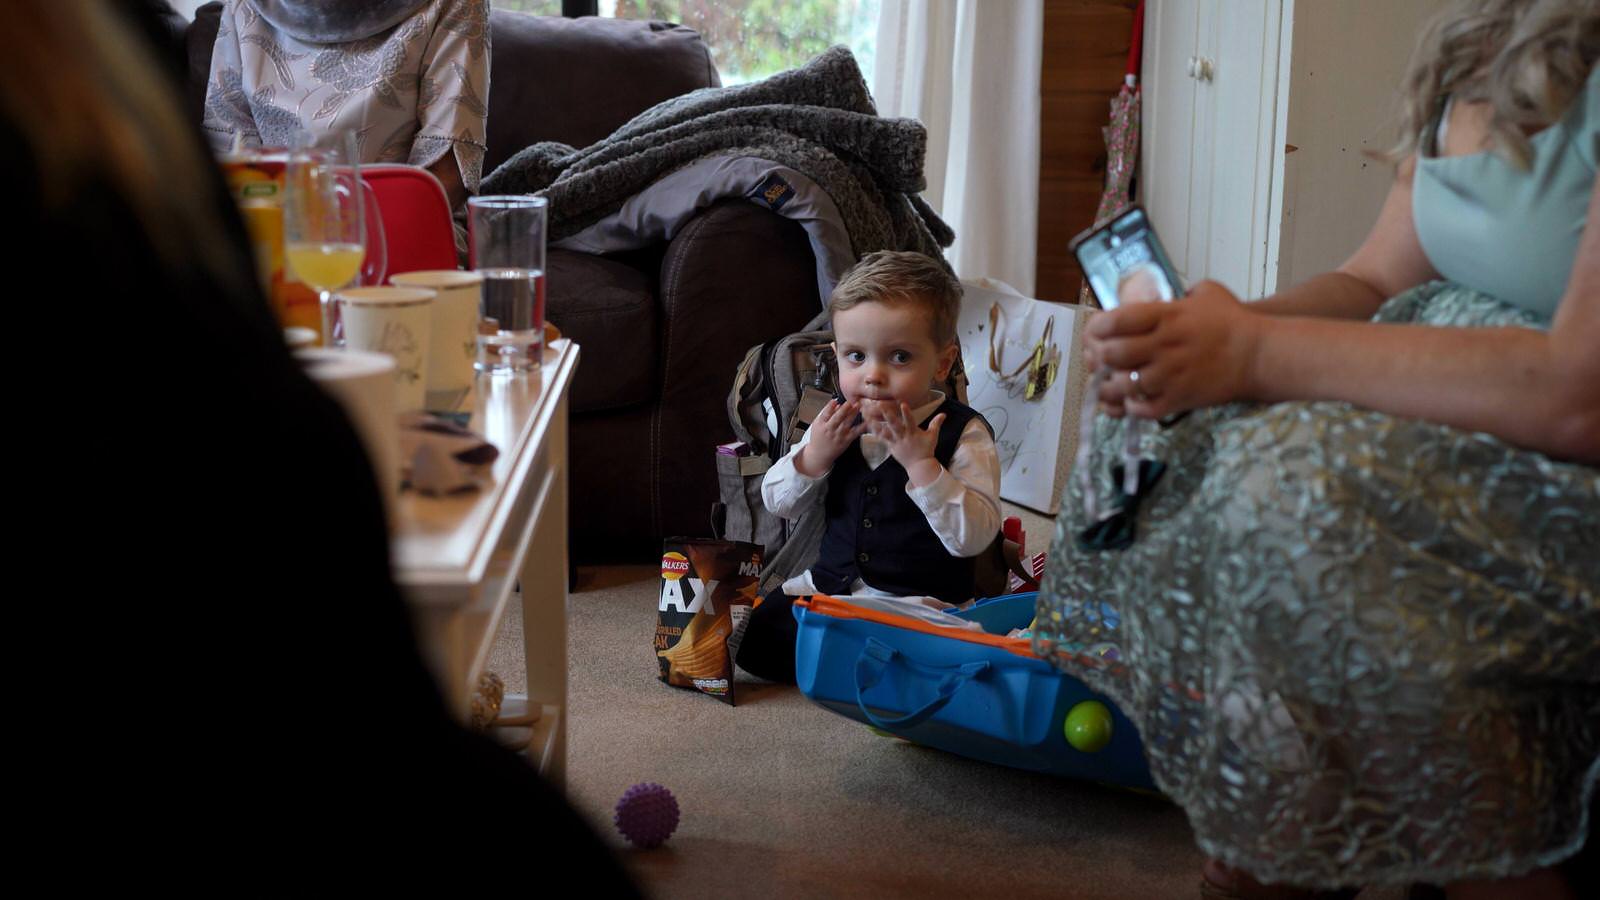 cheeky toddler pageboy sits eating snacks